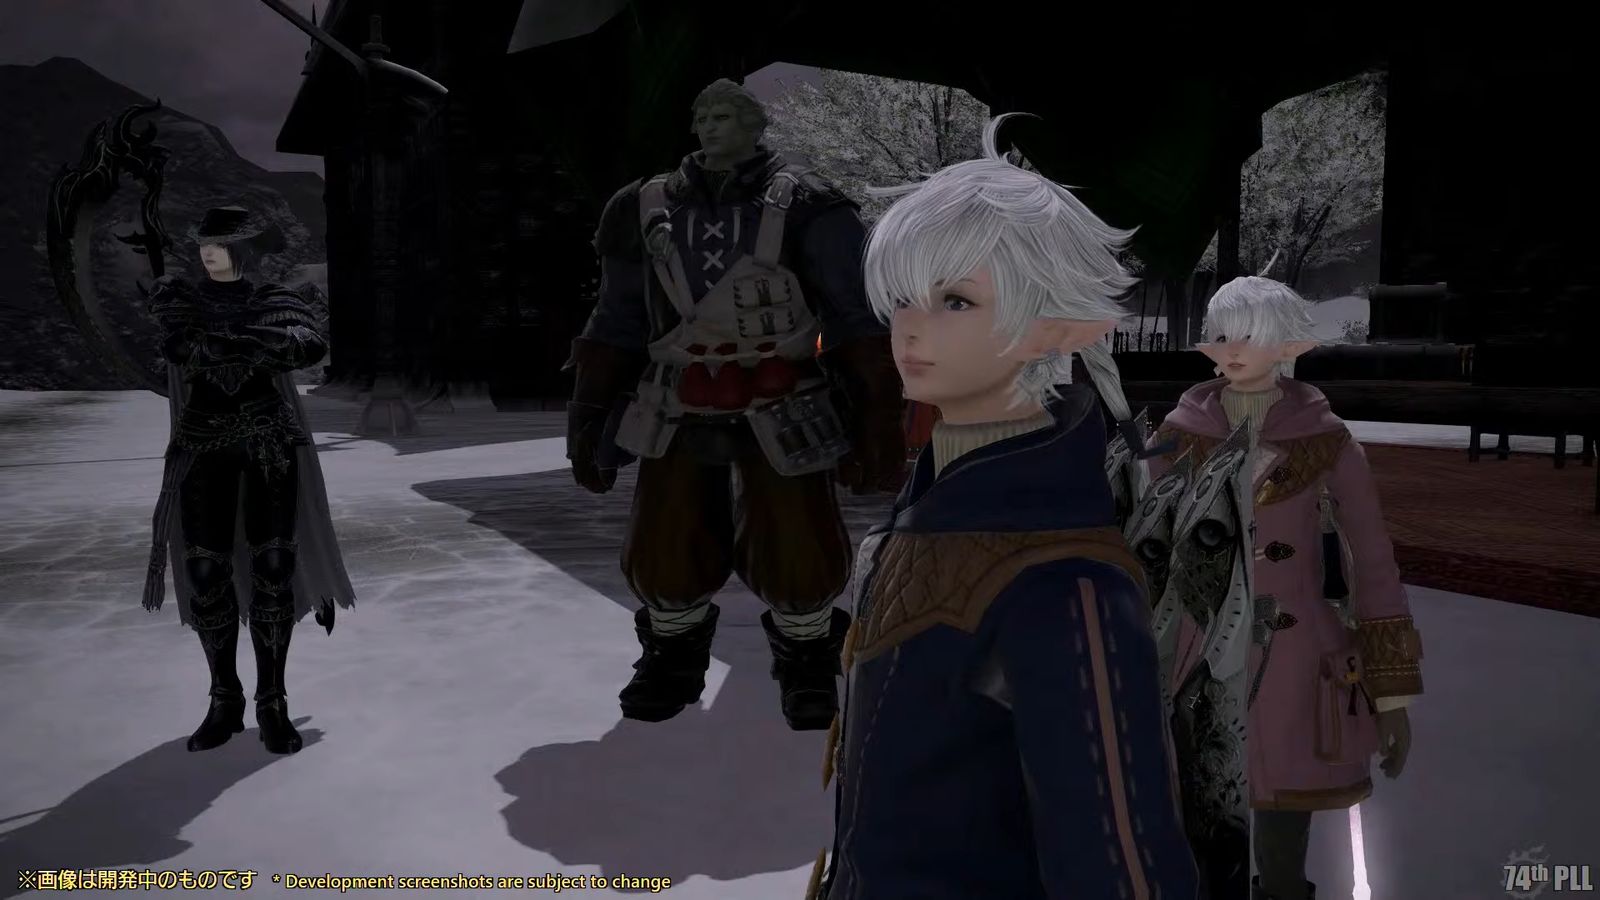 The 6.3 patch will see the continuation of the FFXIV questline